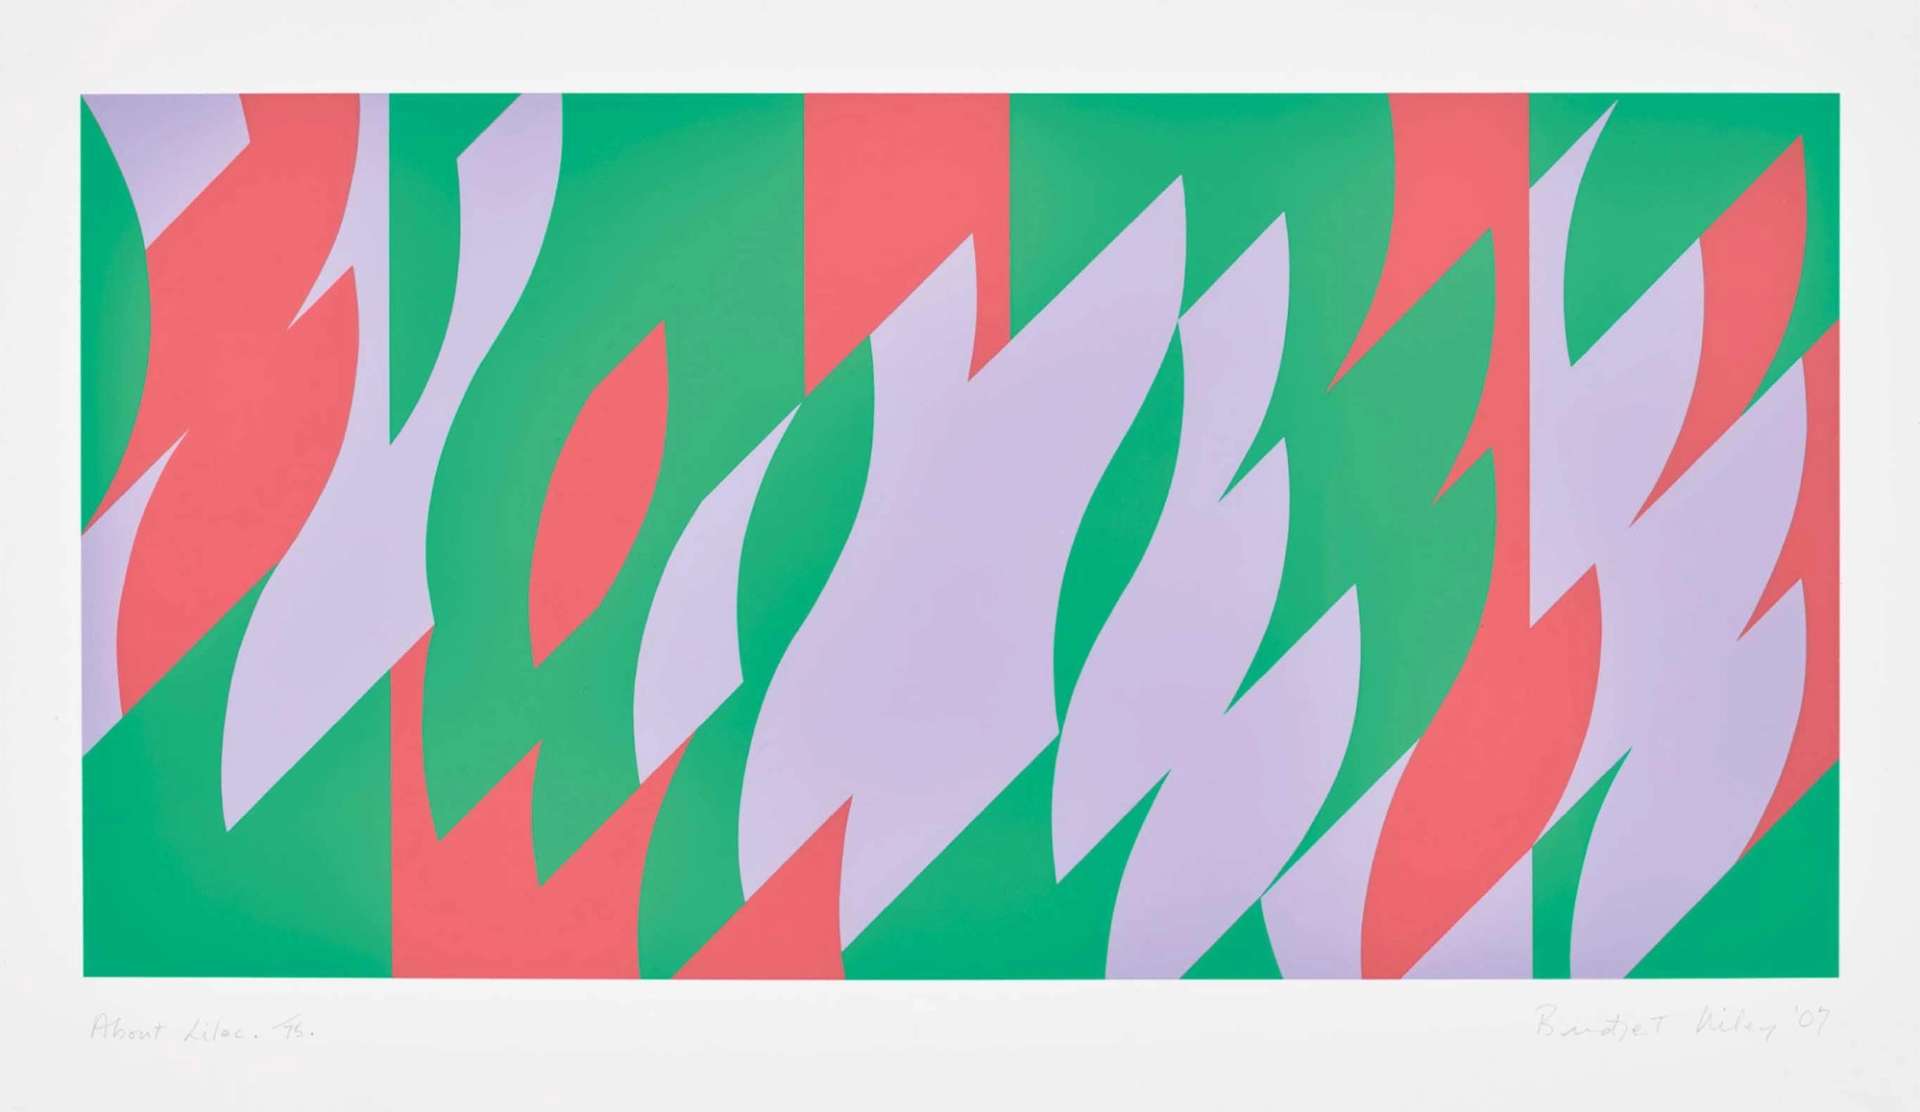 Bridget Riley: About Lilac - Signed Print